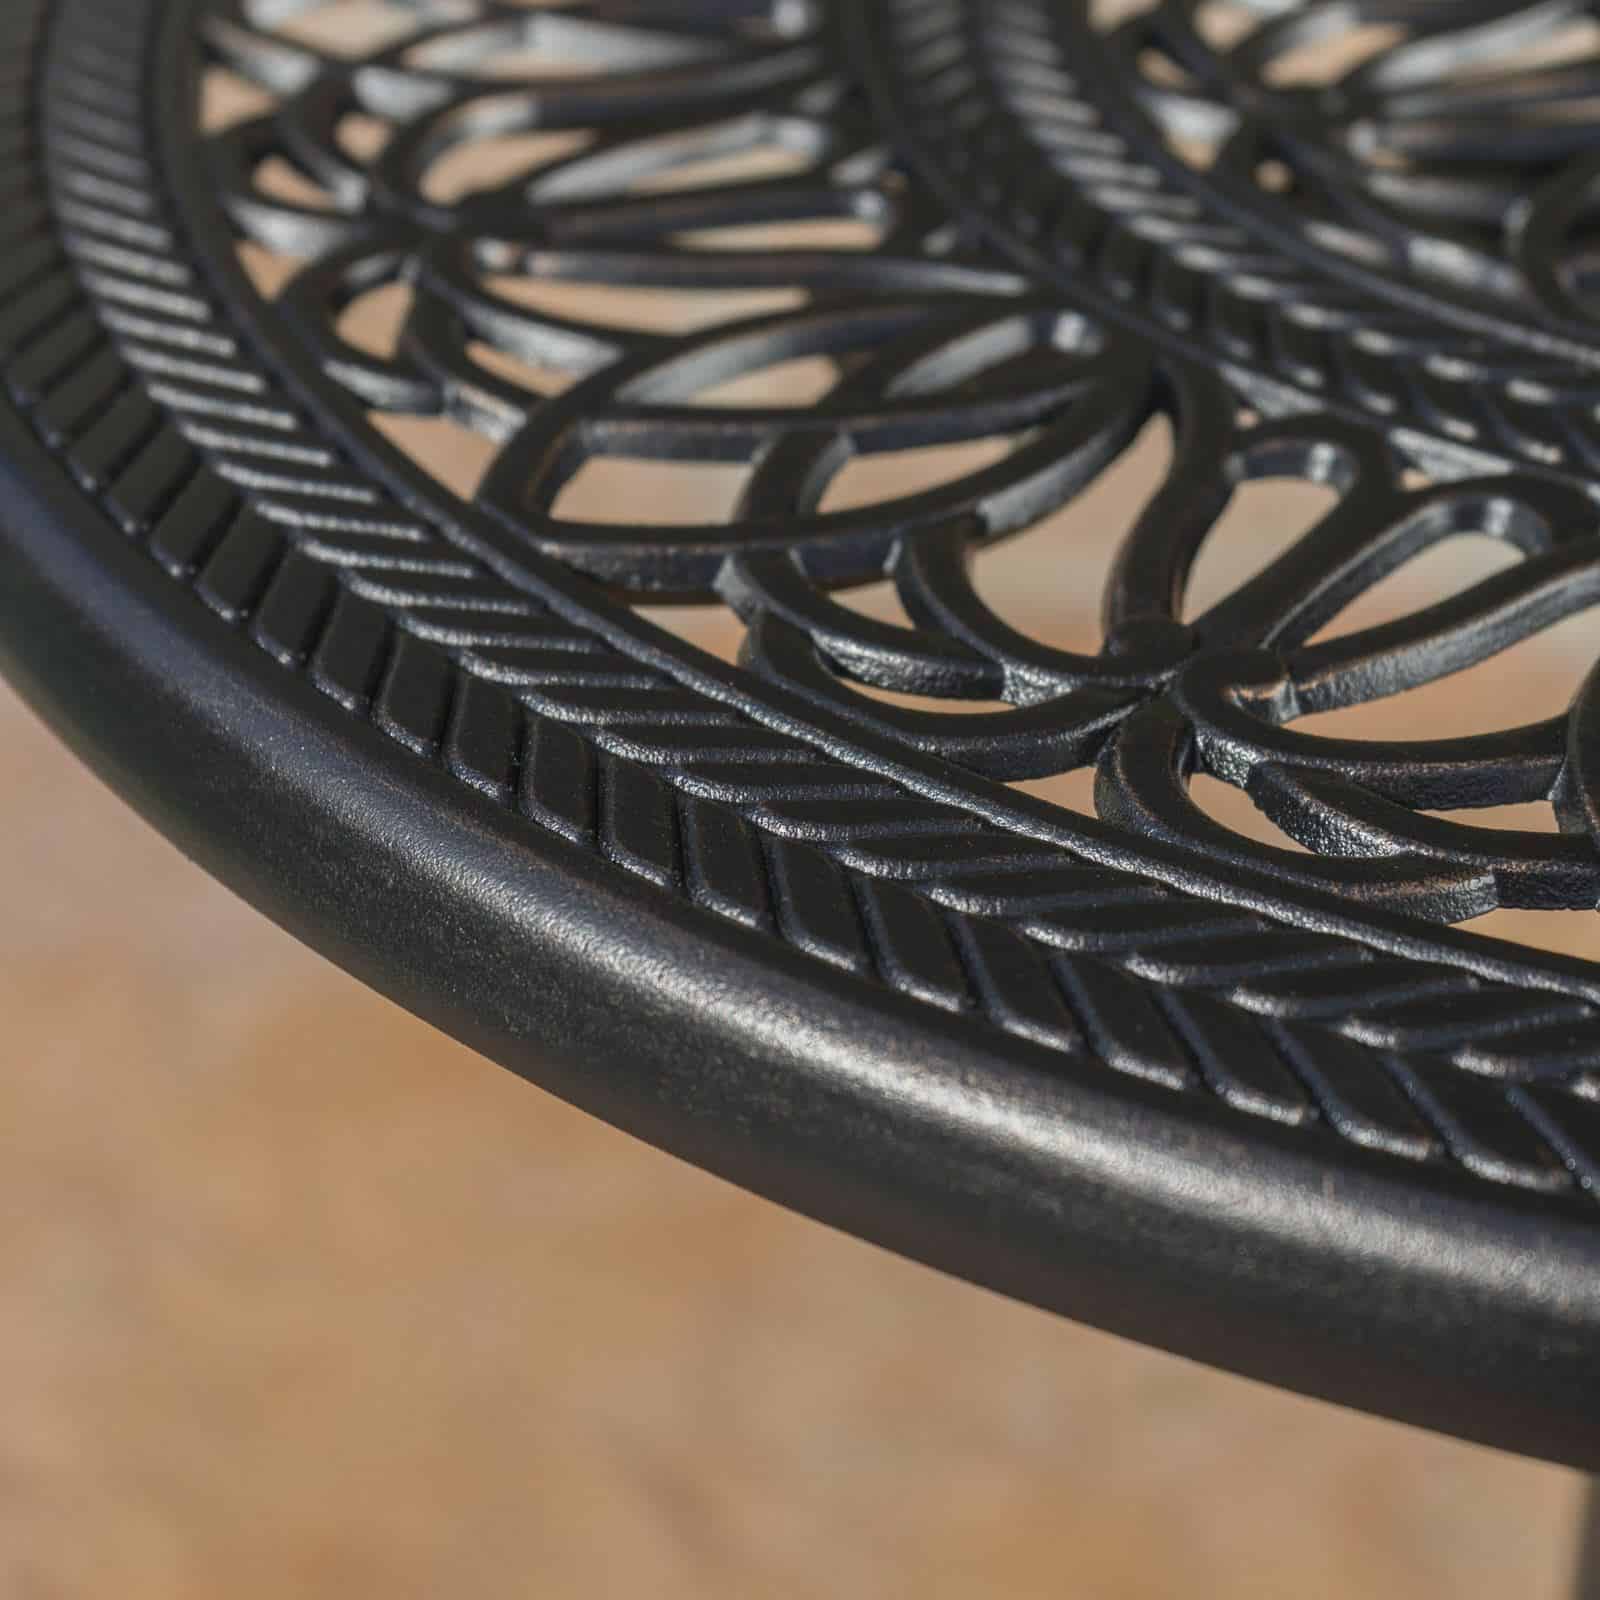 A close up of an outdoor table with an intricate design.